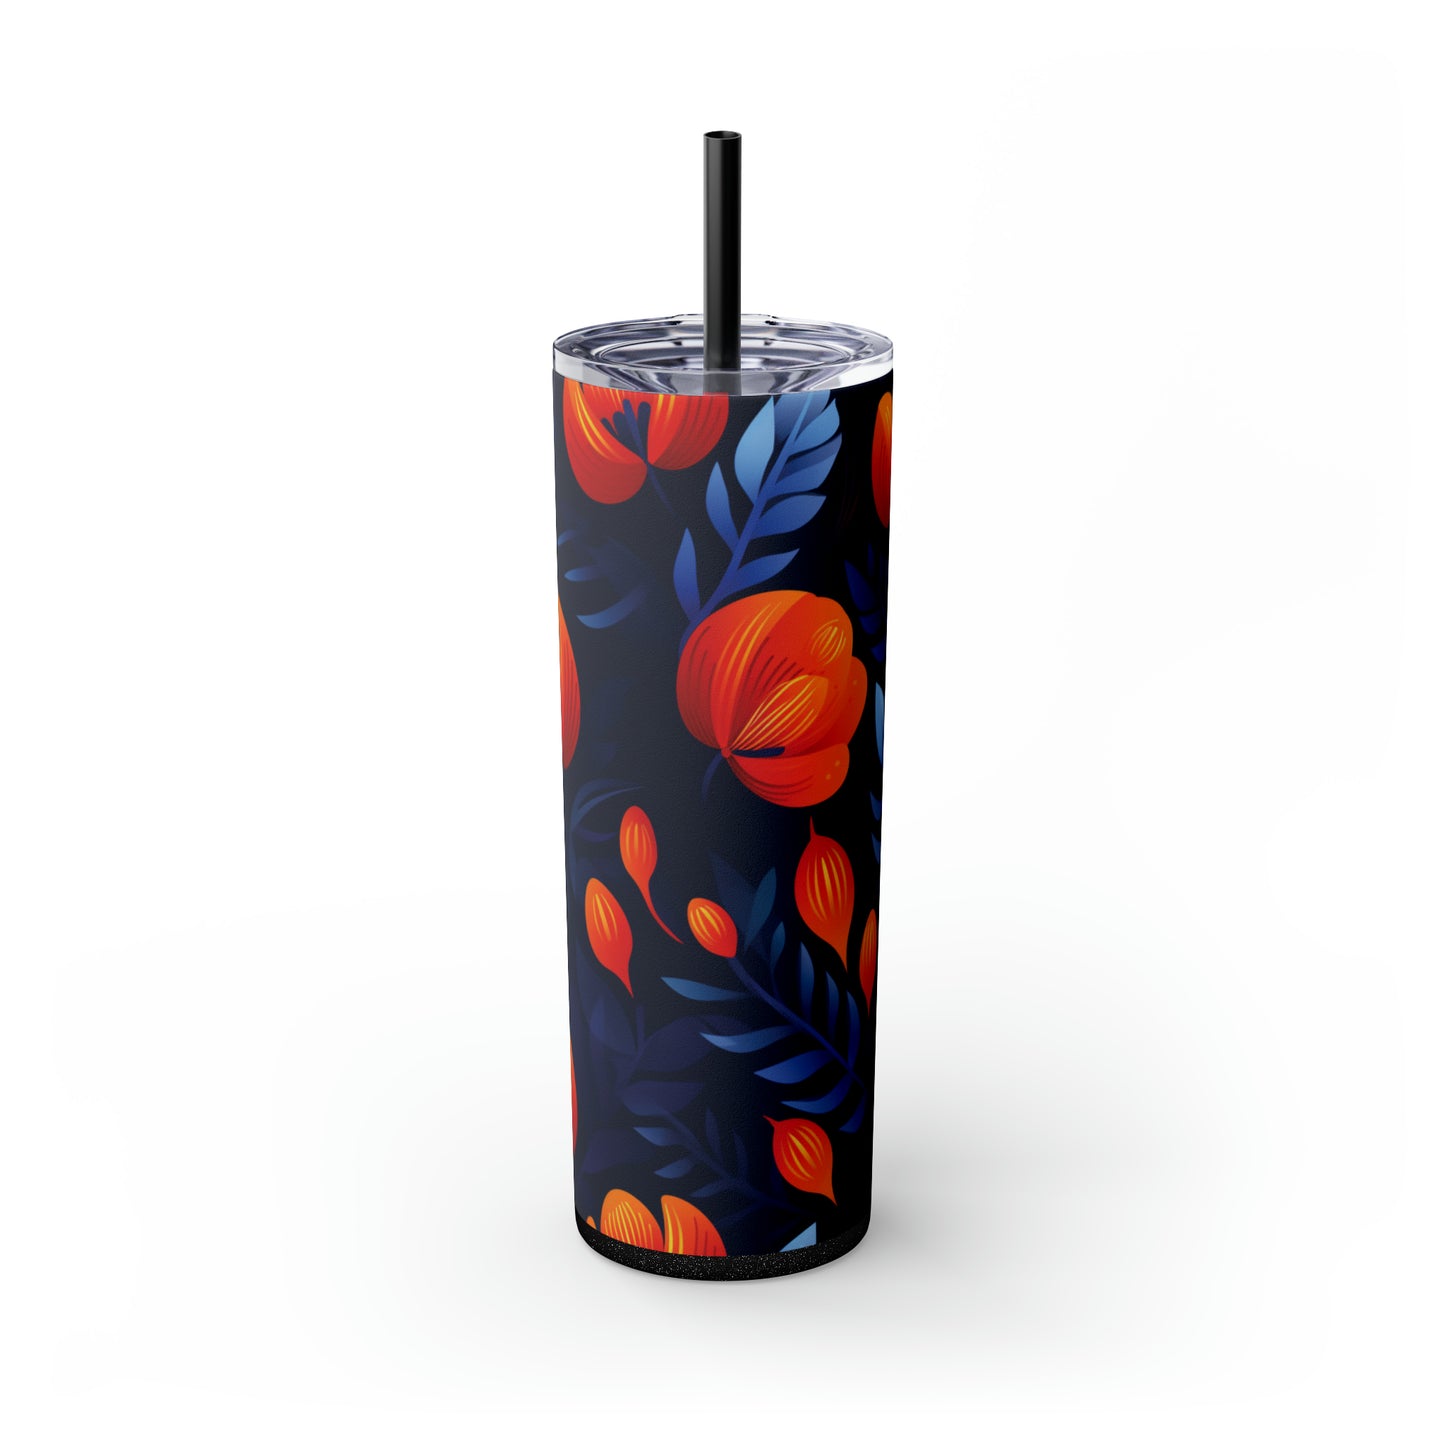 Orange Prince 20-Ounce Insulated Stainless Steel Skinny Tumbler with Lid and Straw - Dyborn Designs